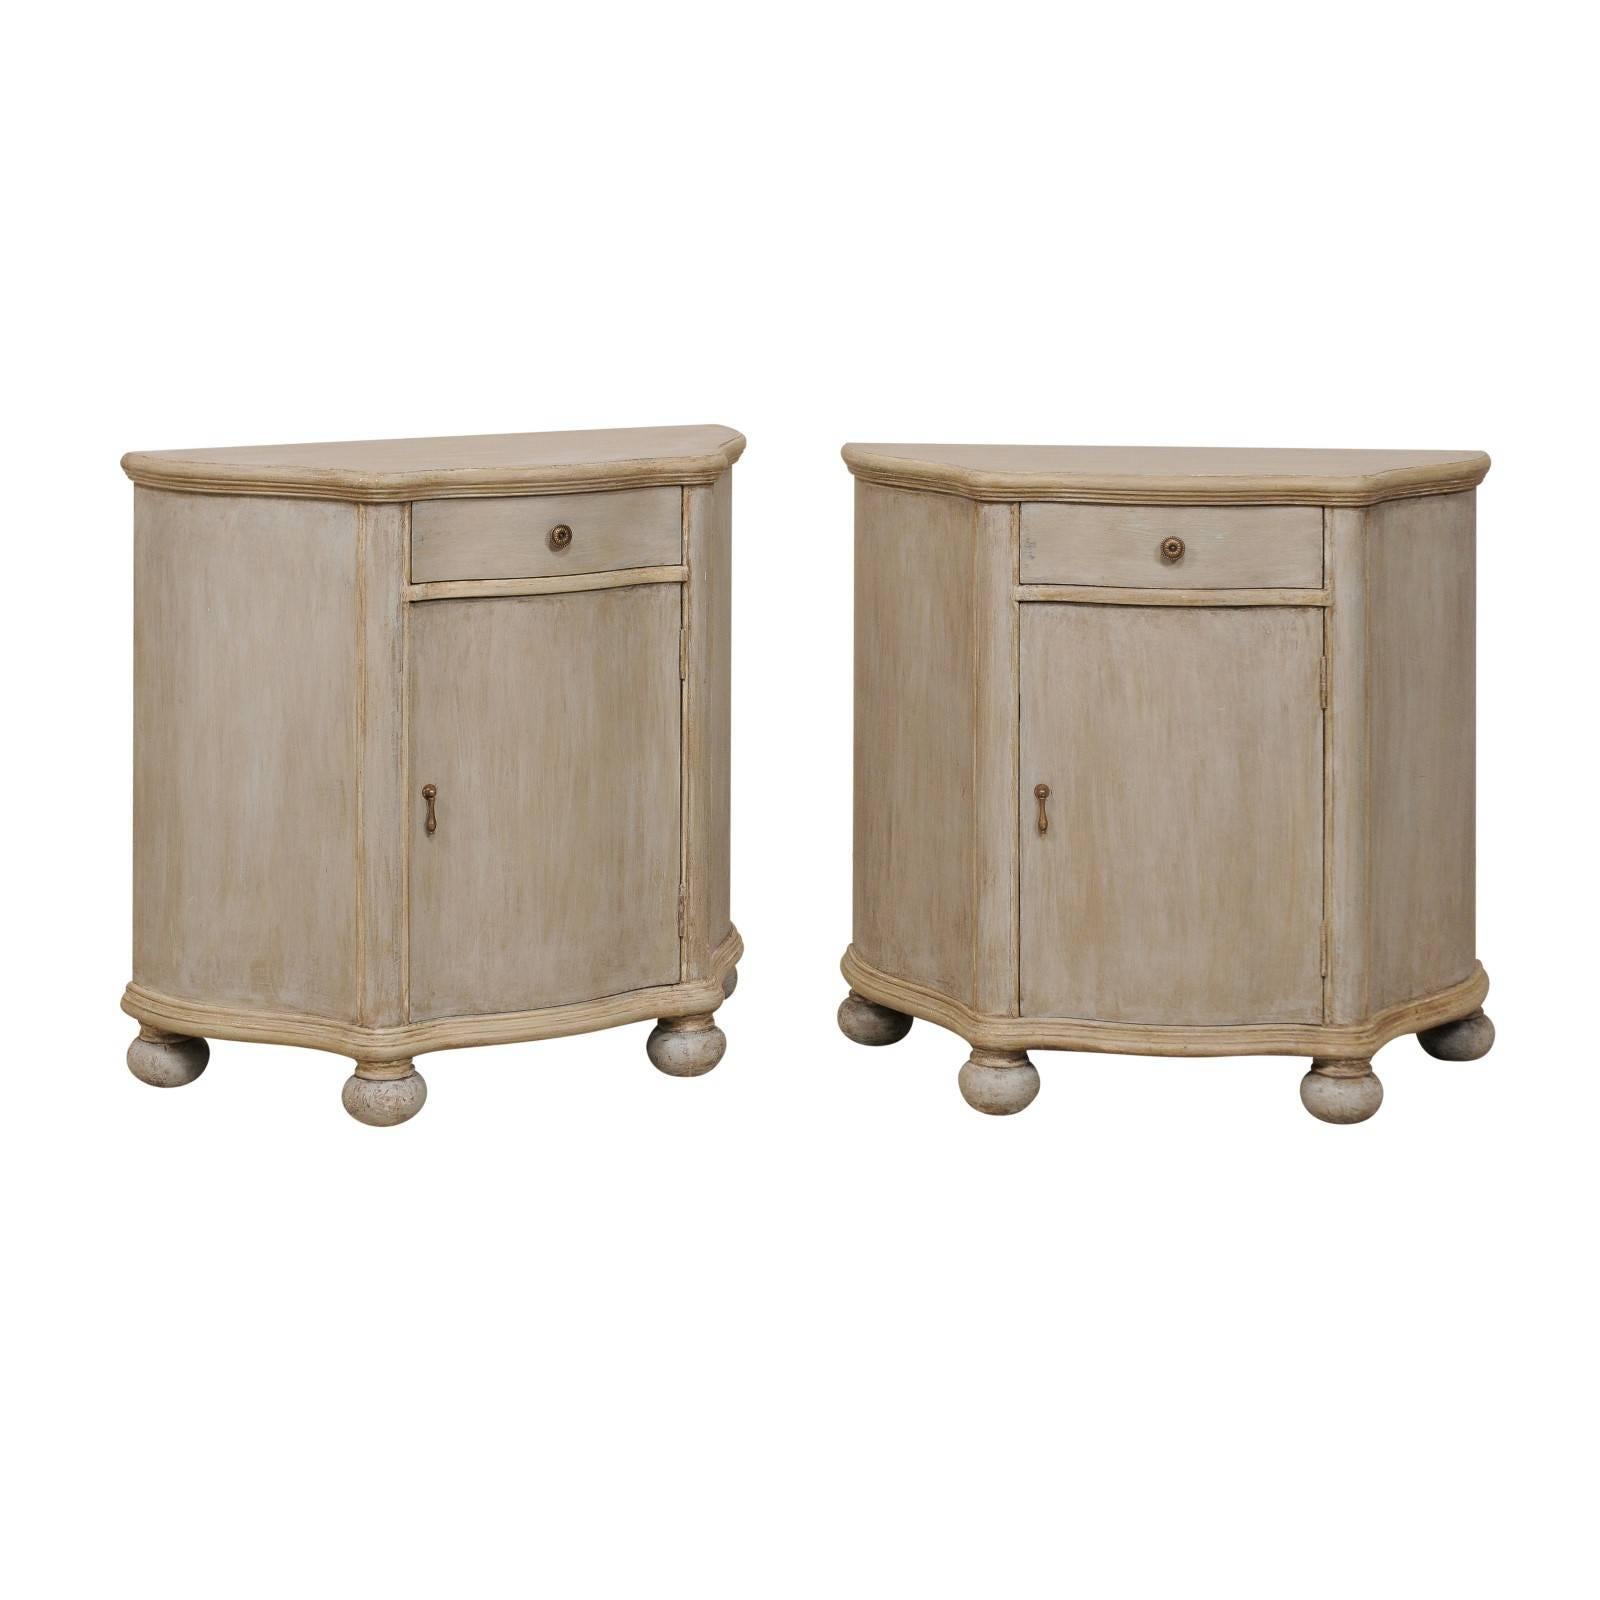 Pair of Vintage Painted Wood Demi-Styled Cabinets on Rounded Bun Feet